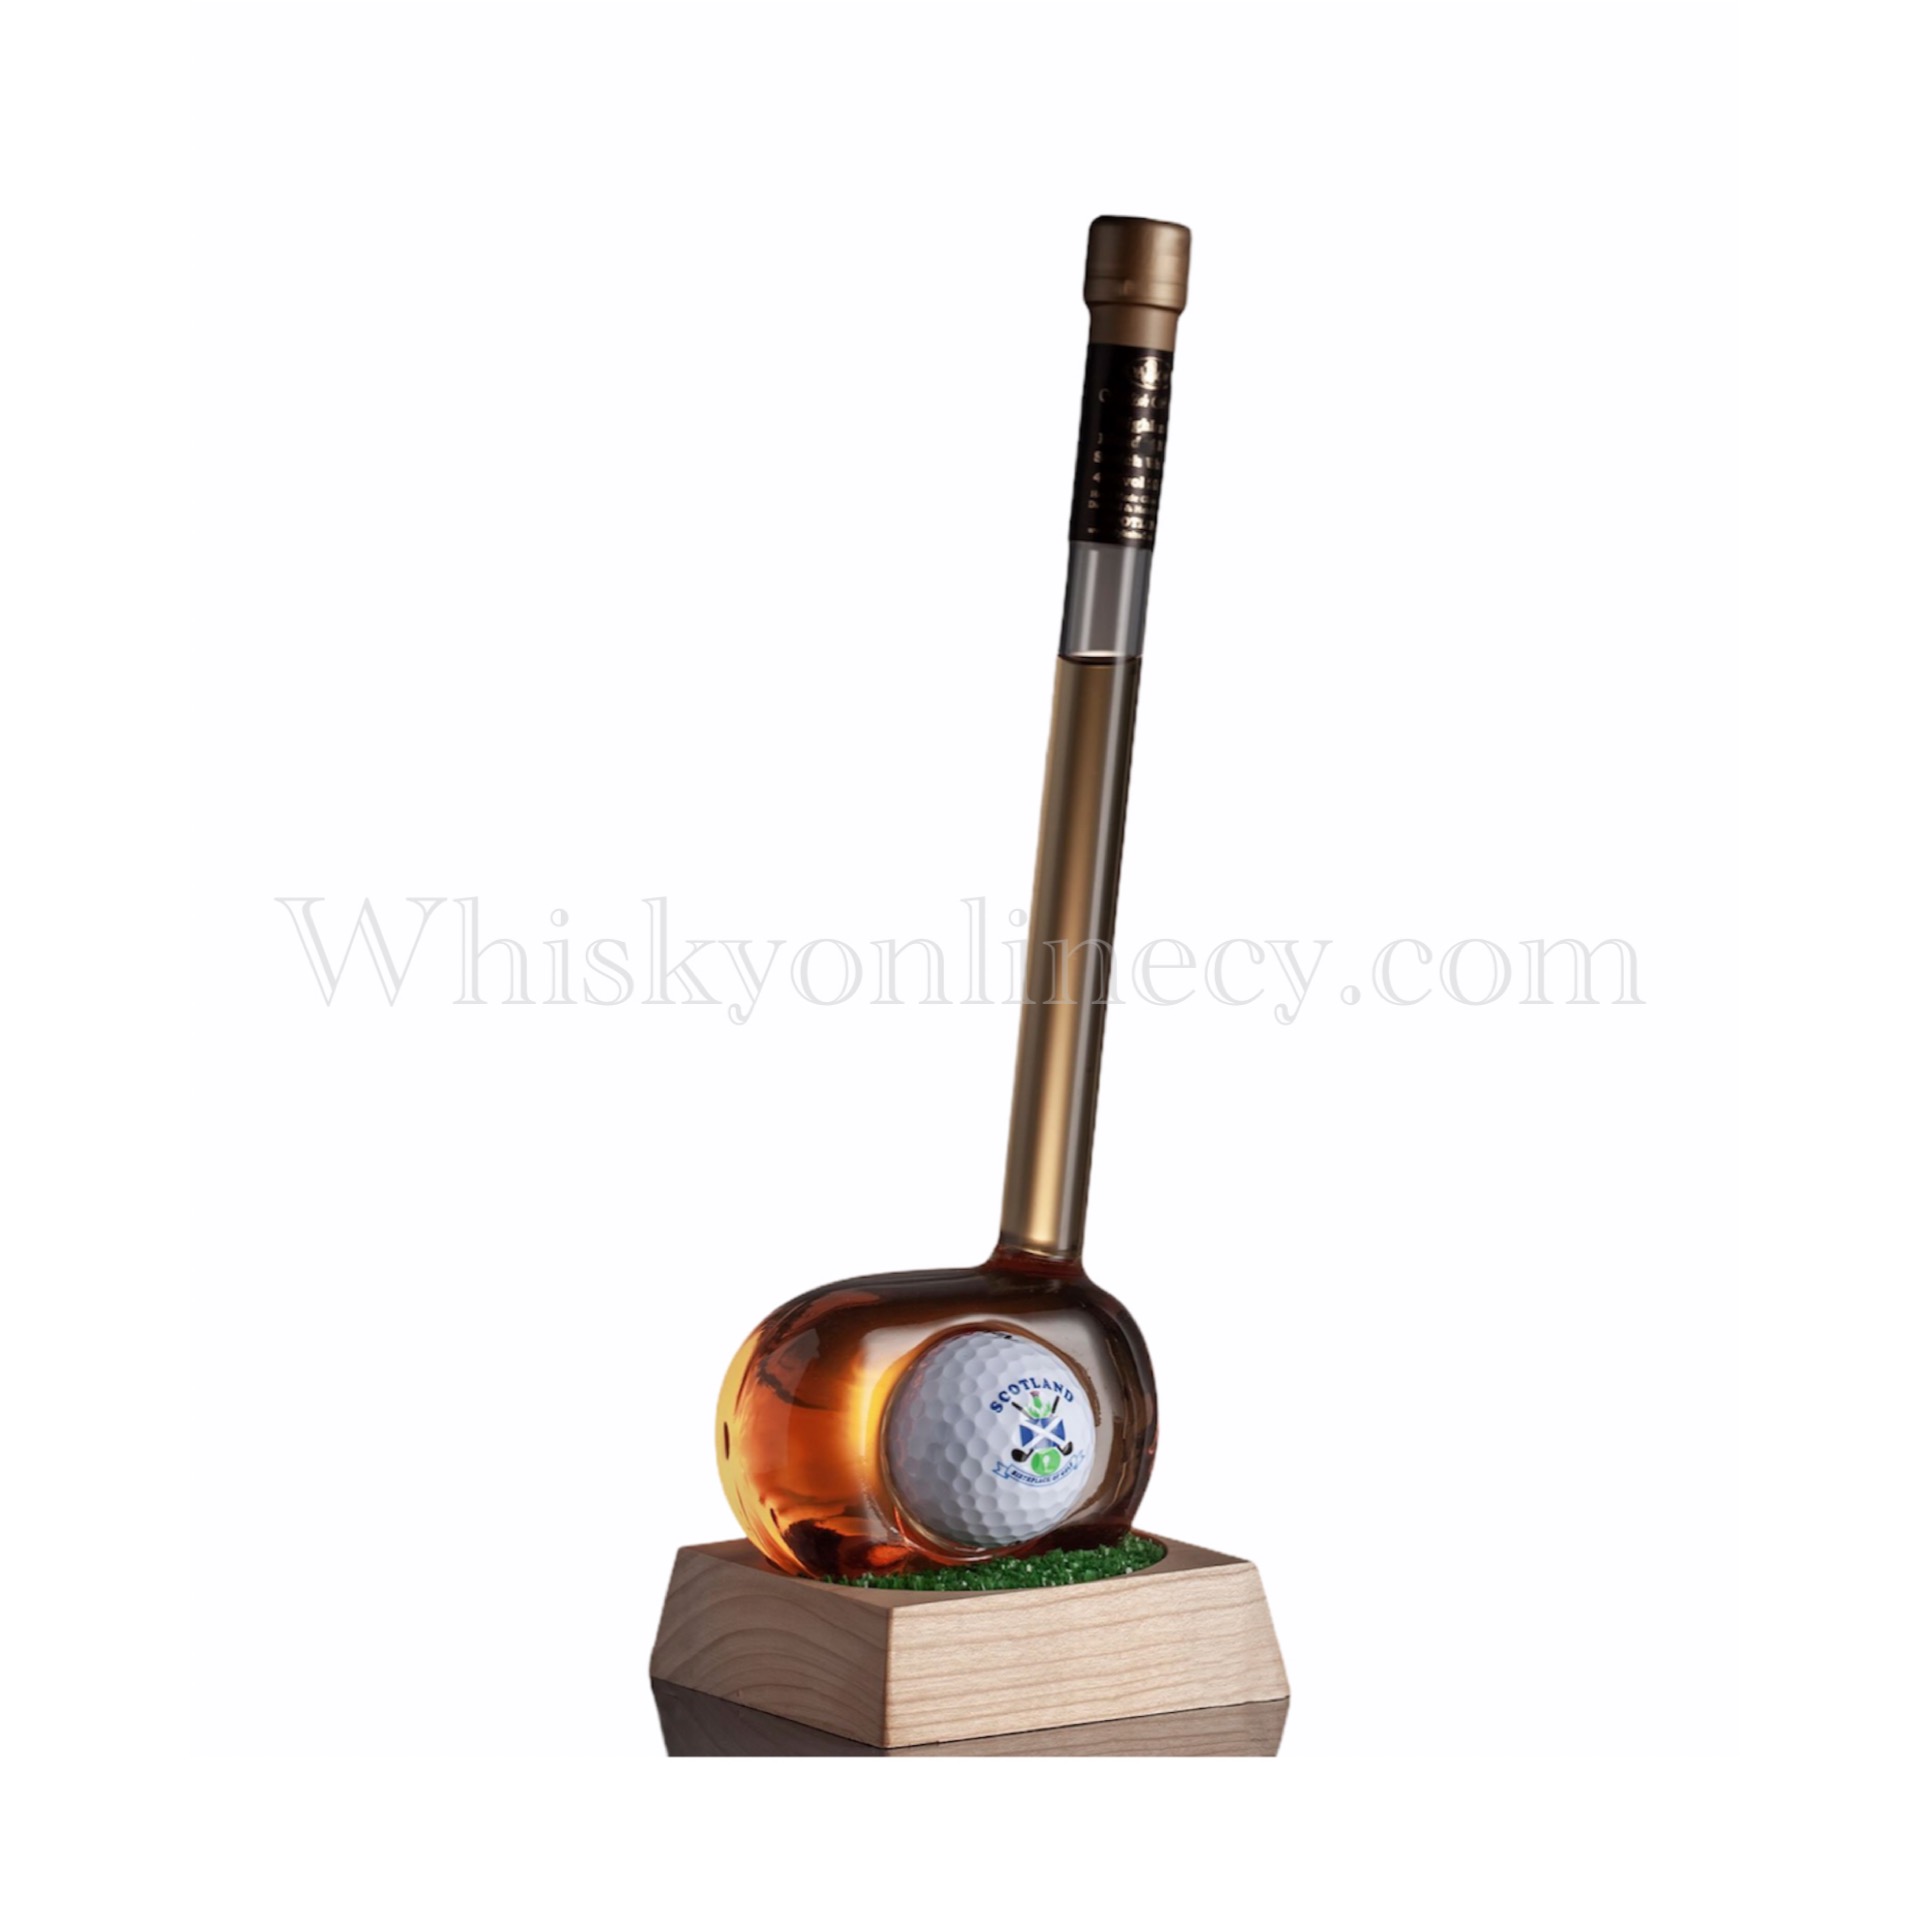 https://whiskyonlinecy.com/wp-content/uploads/2021/04/Whisky-Decanter-Golf-Club-Refillable-40.jpg